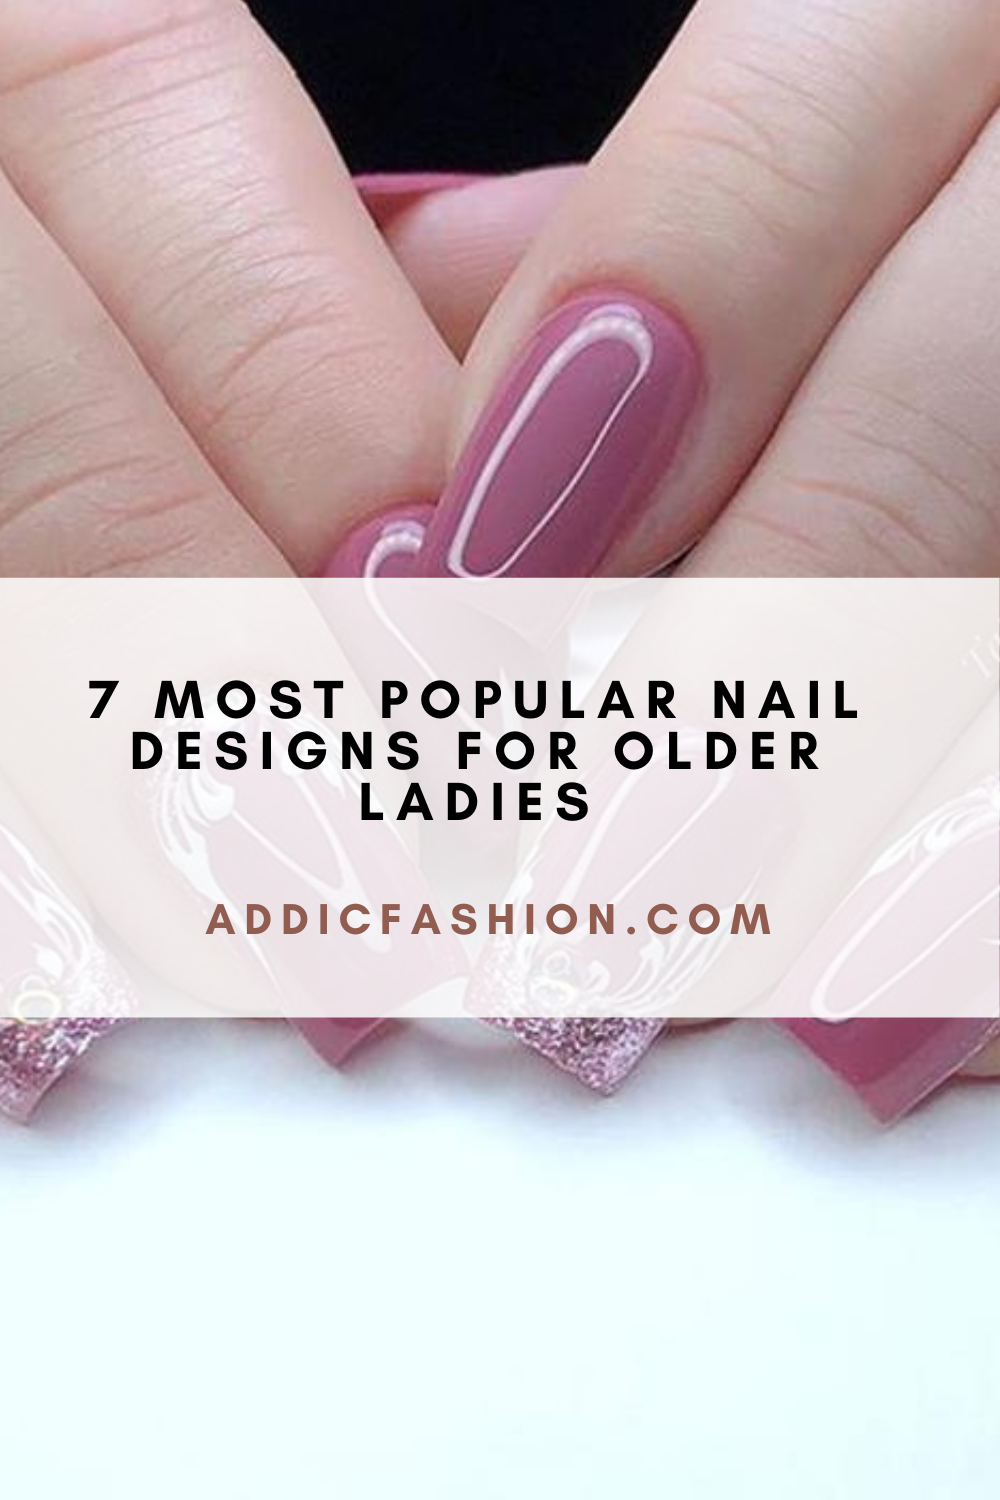 7 Most Popular Nail Designs For Older Ladies